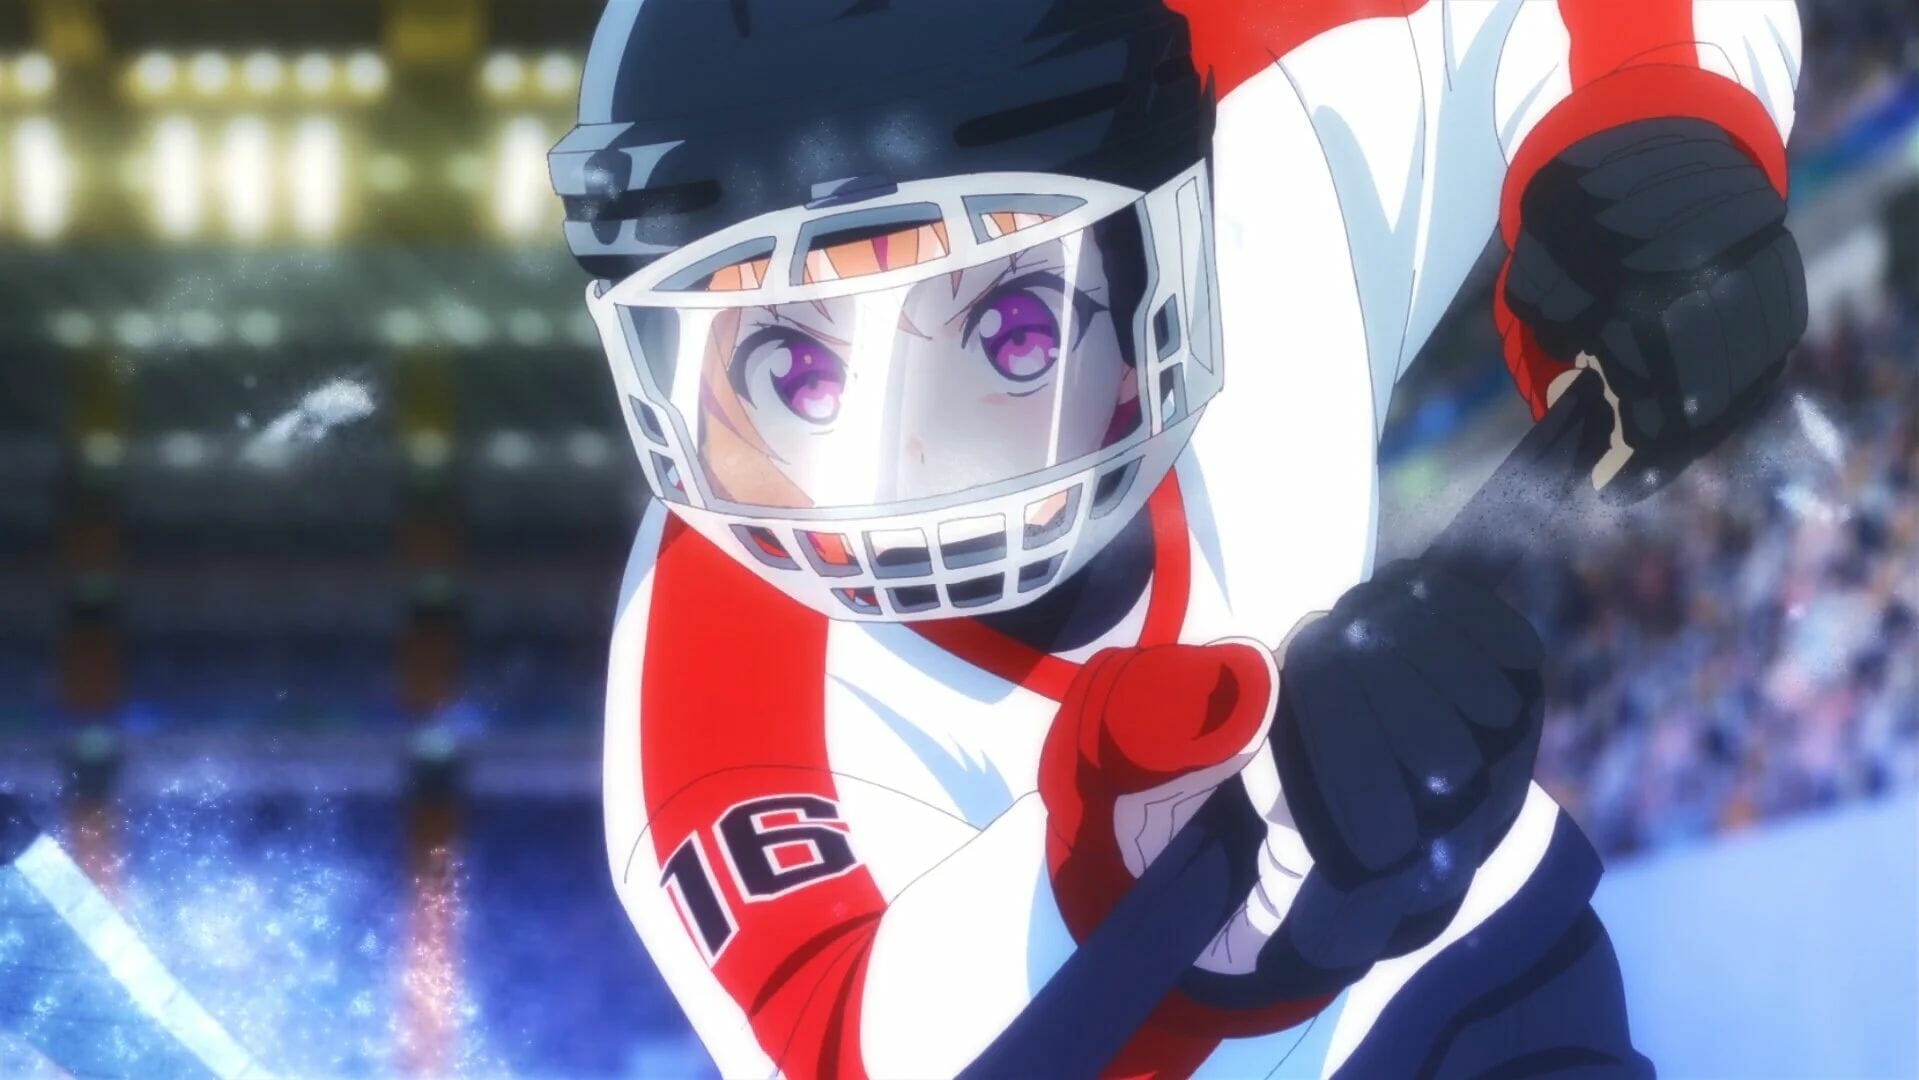 Screenshot from PuraOre! Pride of Orange that depicts a girl in a red-and-white hockey uniform.